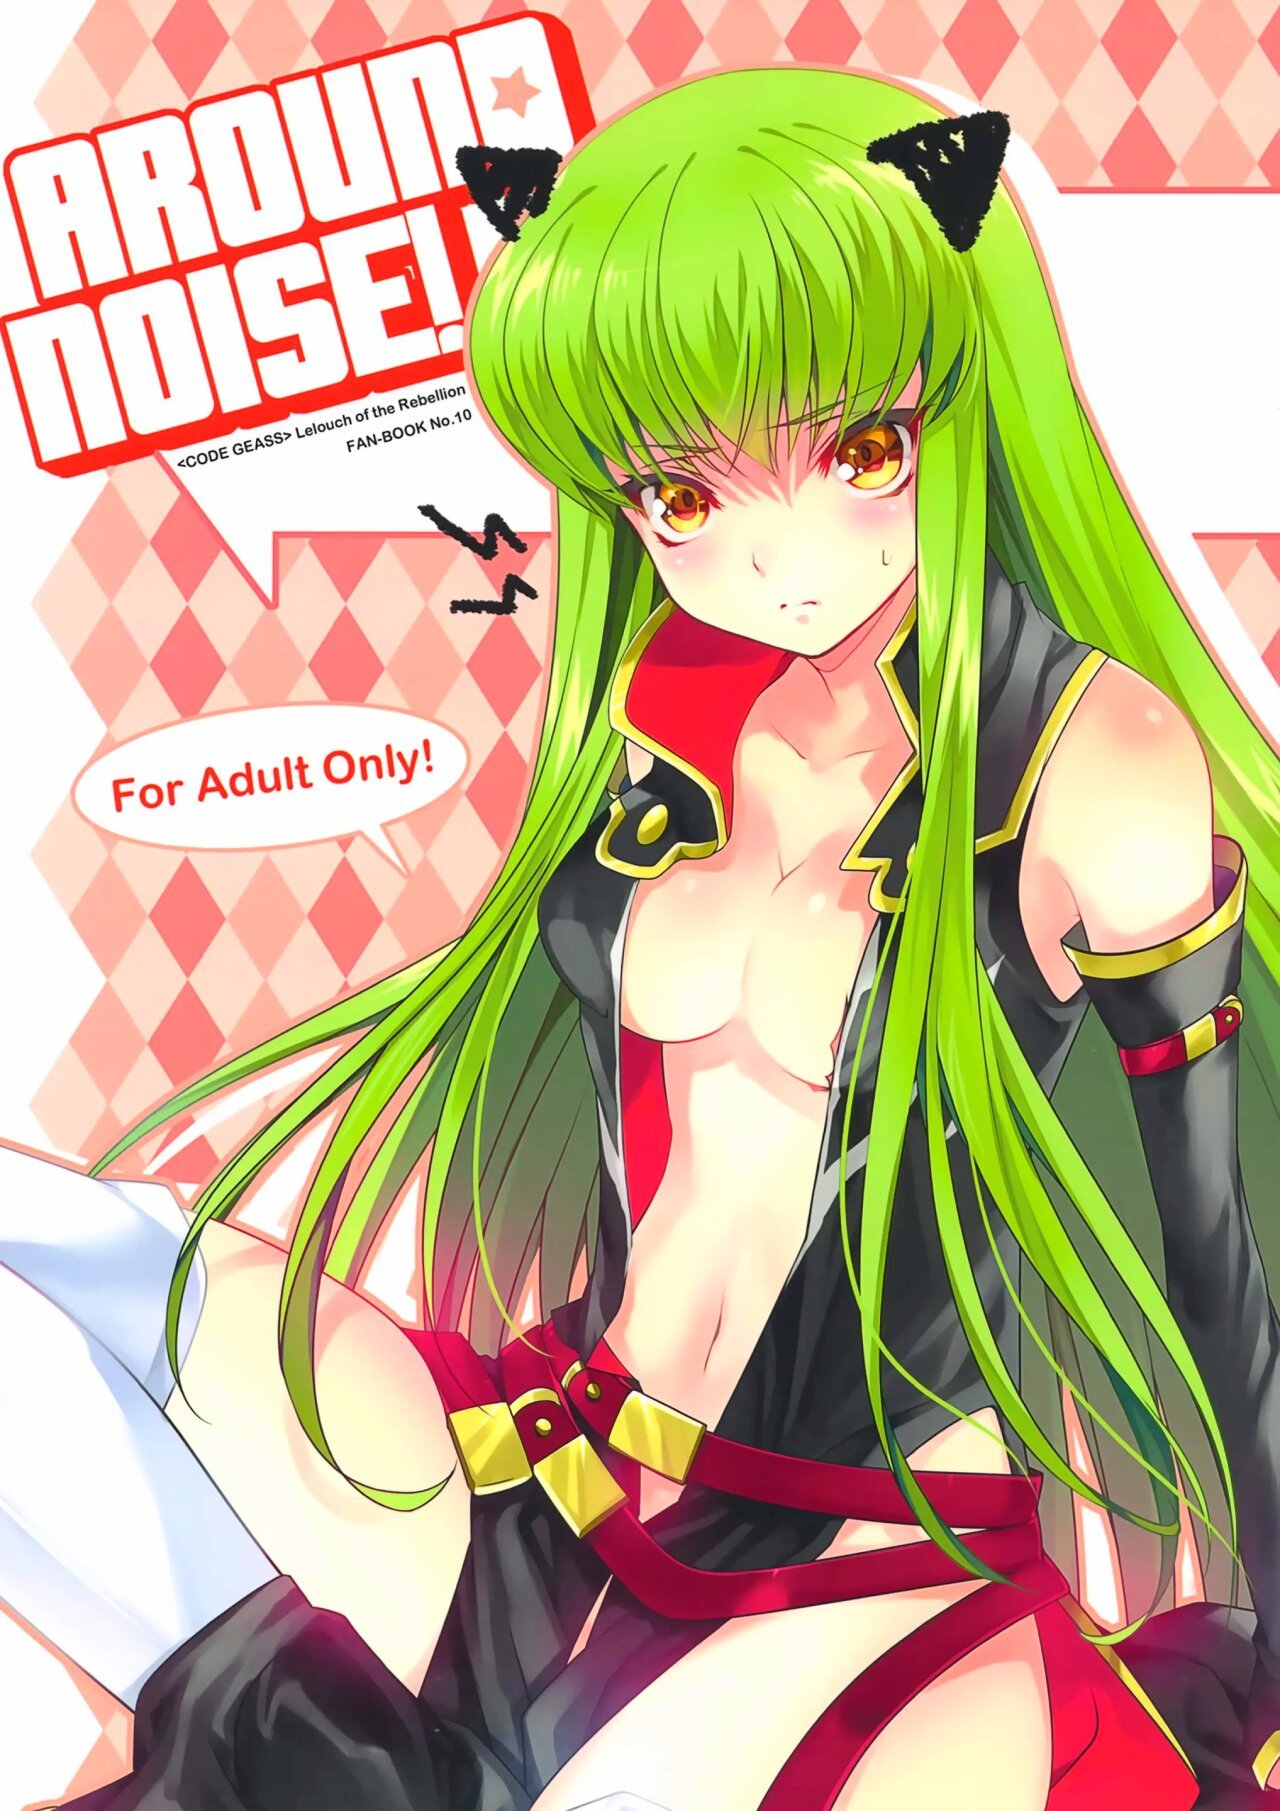 Code Geass Lelouch Of The Rebellion - Around Noise! - 0